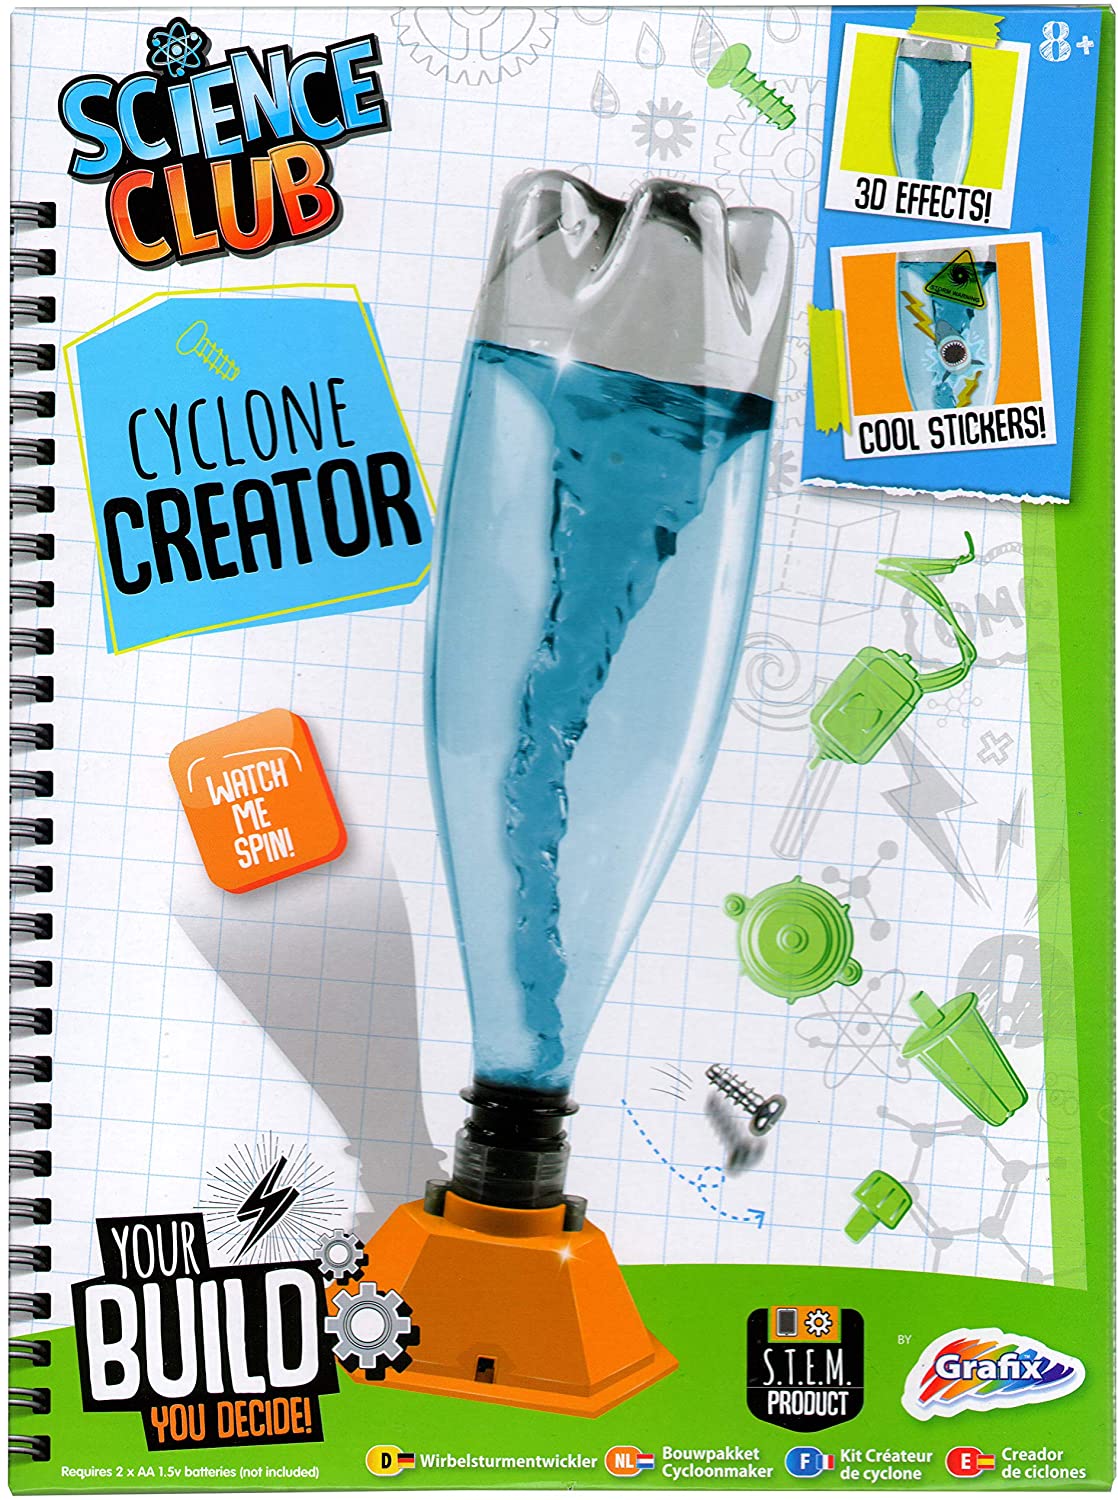 NEW OFFICIAL SCIENCE CLUB KITS METAL CAN ROBOT SCRIBBLE BOT CYCLONE CREATOR 